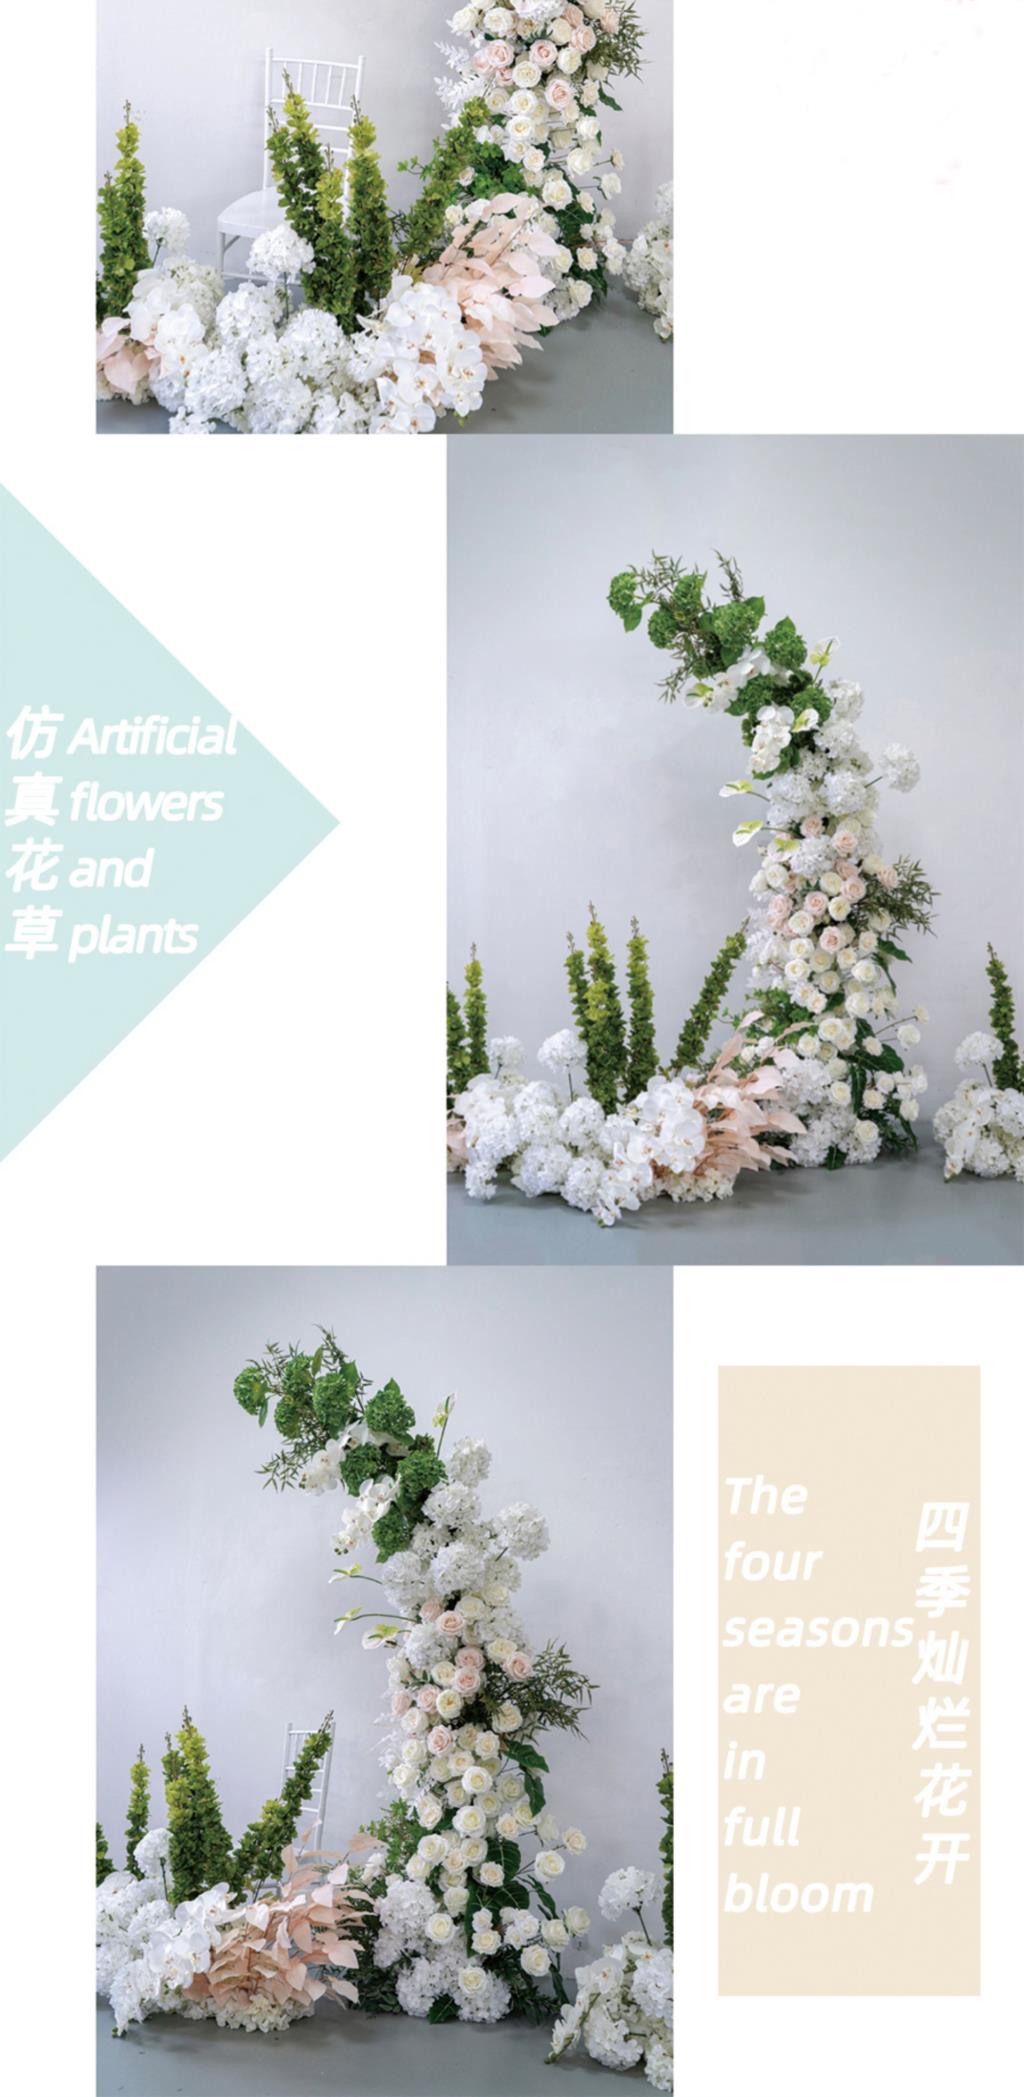 flower arrangements with lily of the valley2